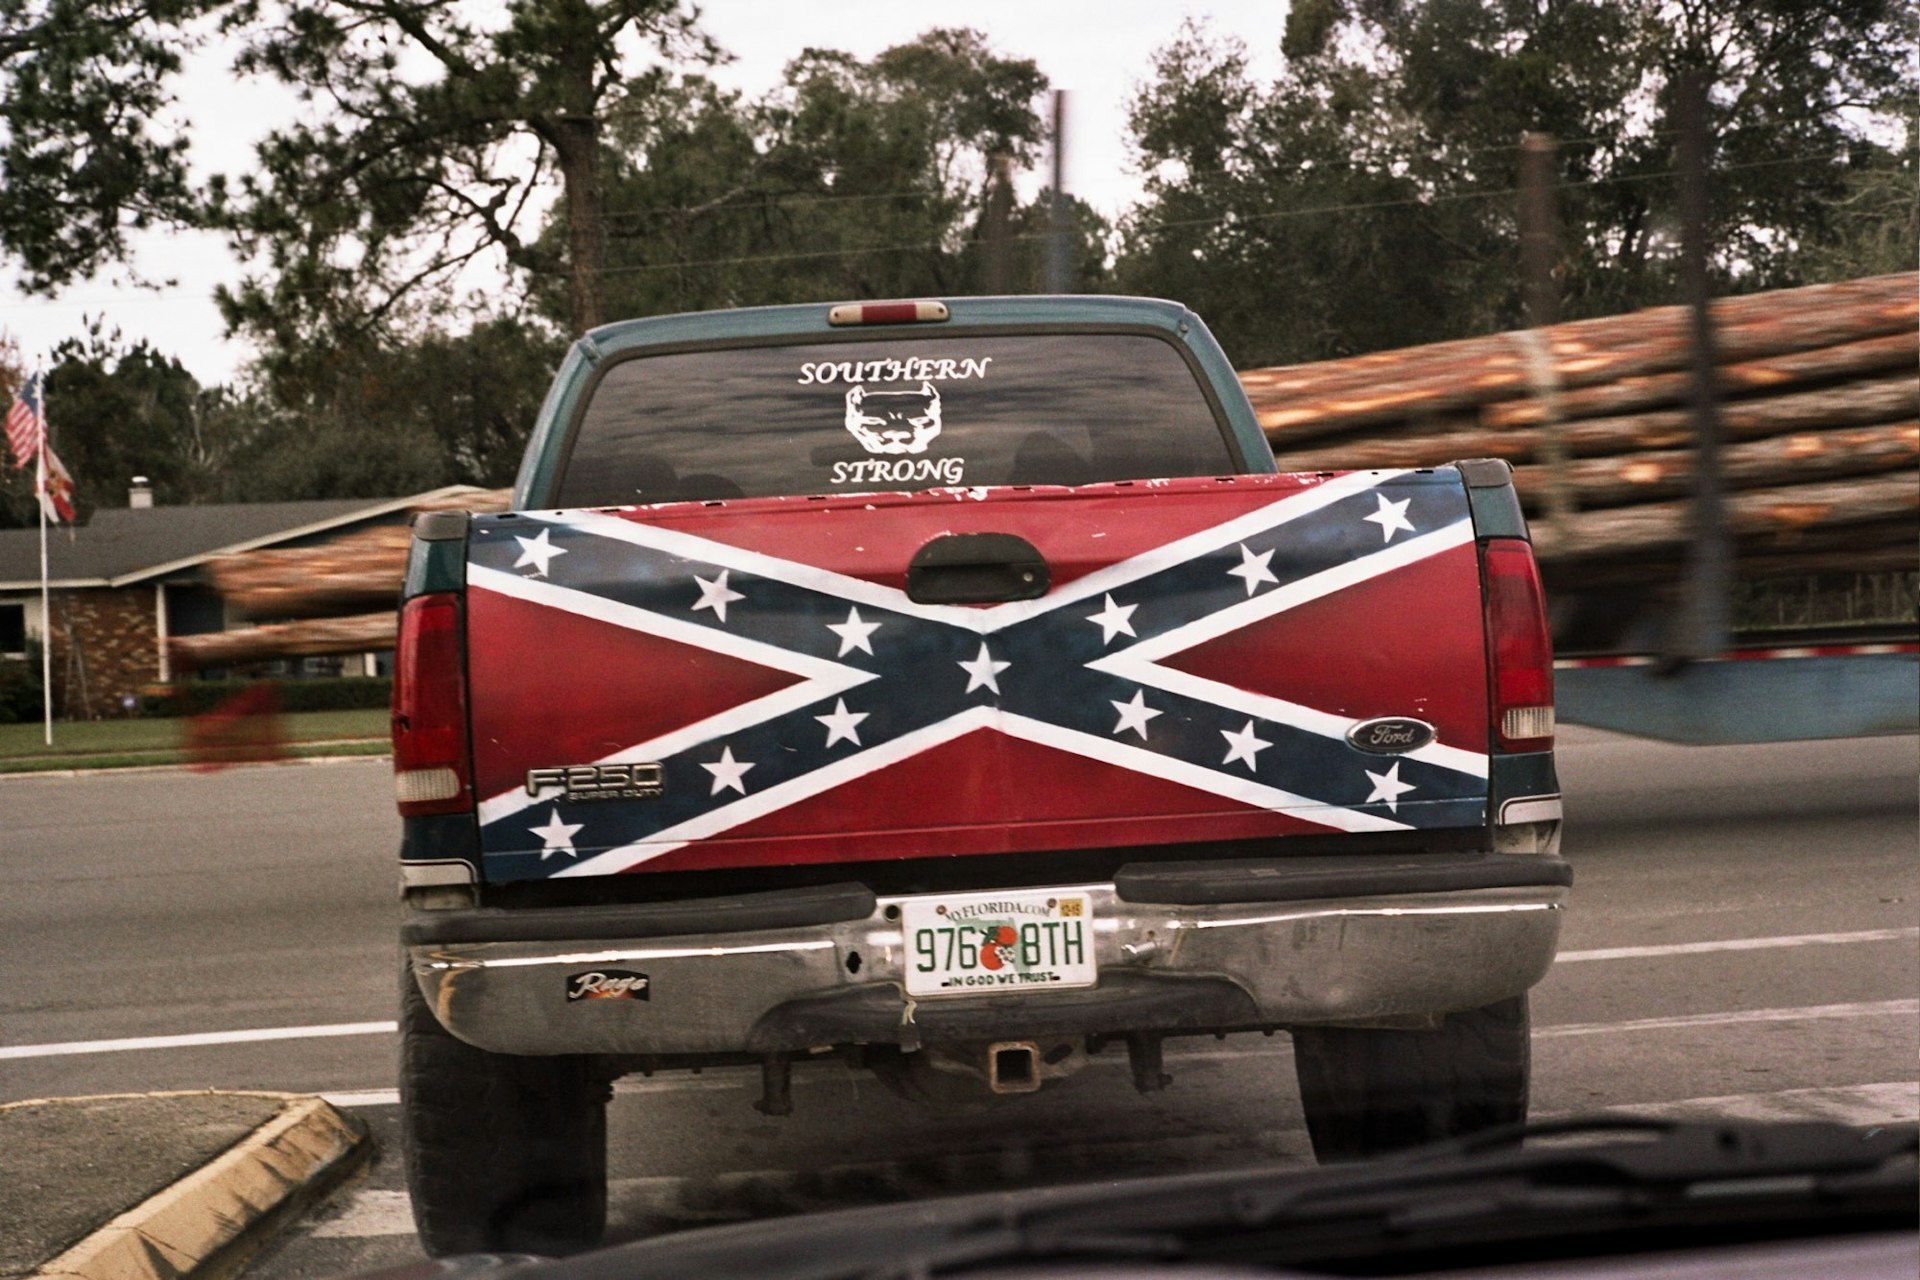 In Pictures: Cracker politics in the Deep South